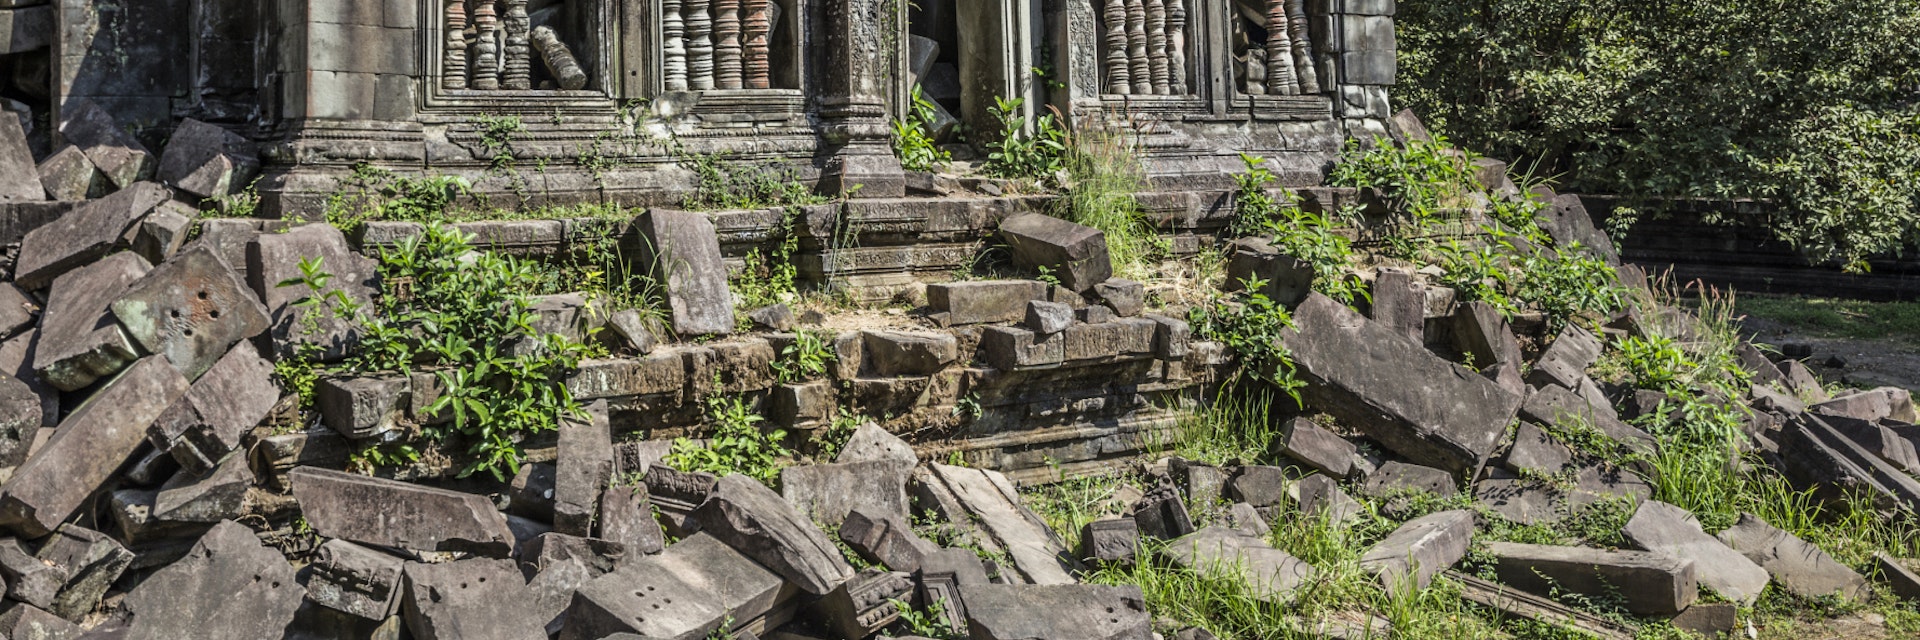 Ruins in Beng Mealea Temple